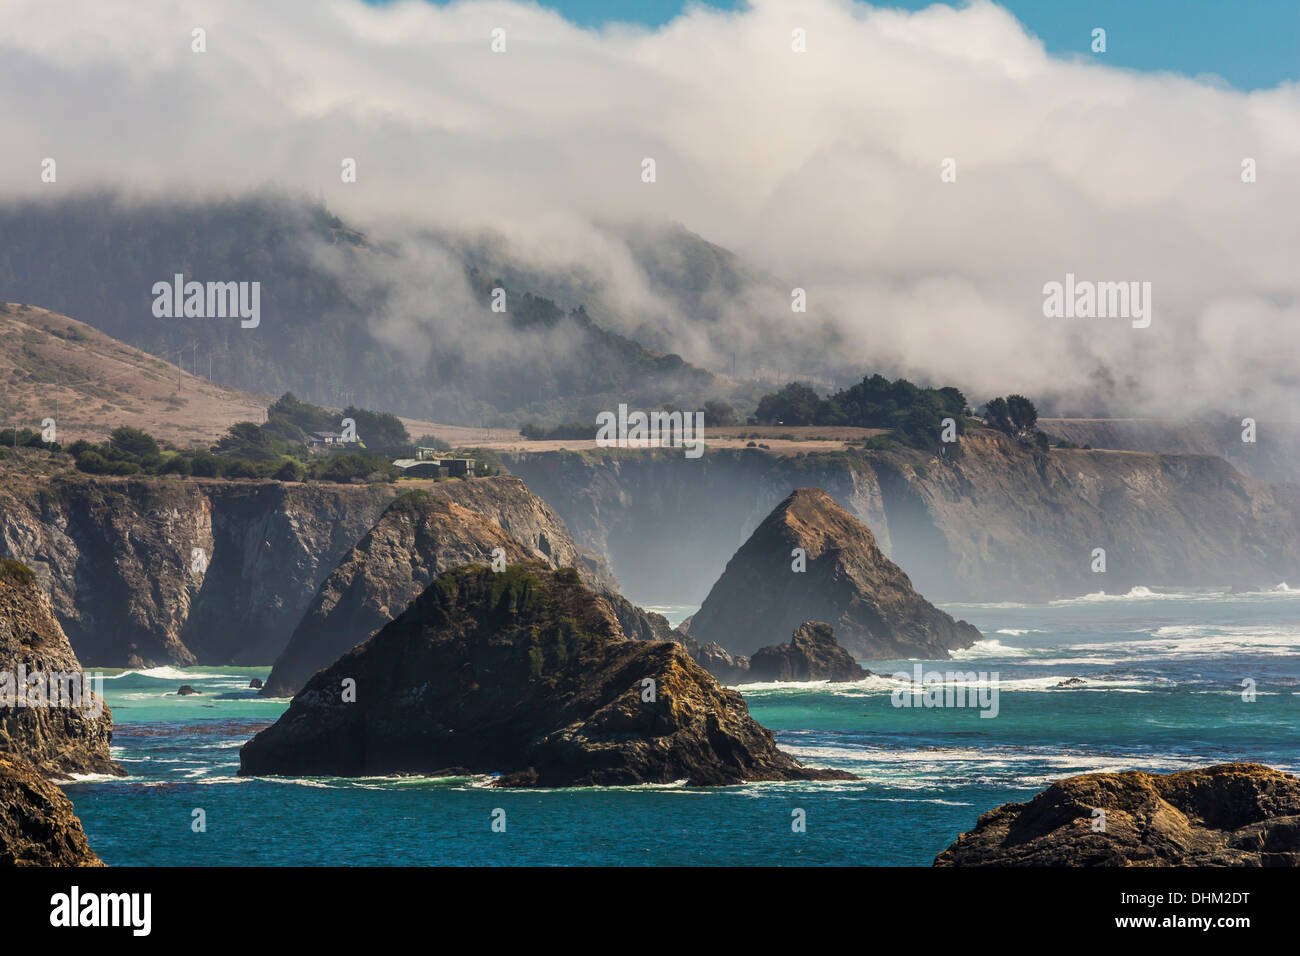 The sea stacks of Cuffey's Cove, a classic view in Mendocino County of the Pacific Coast, viewed from SR 1, California, USA Stock Photo